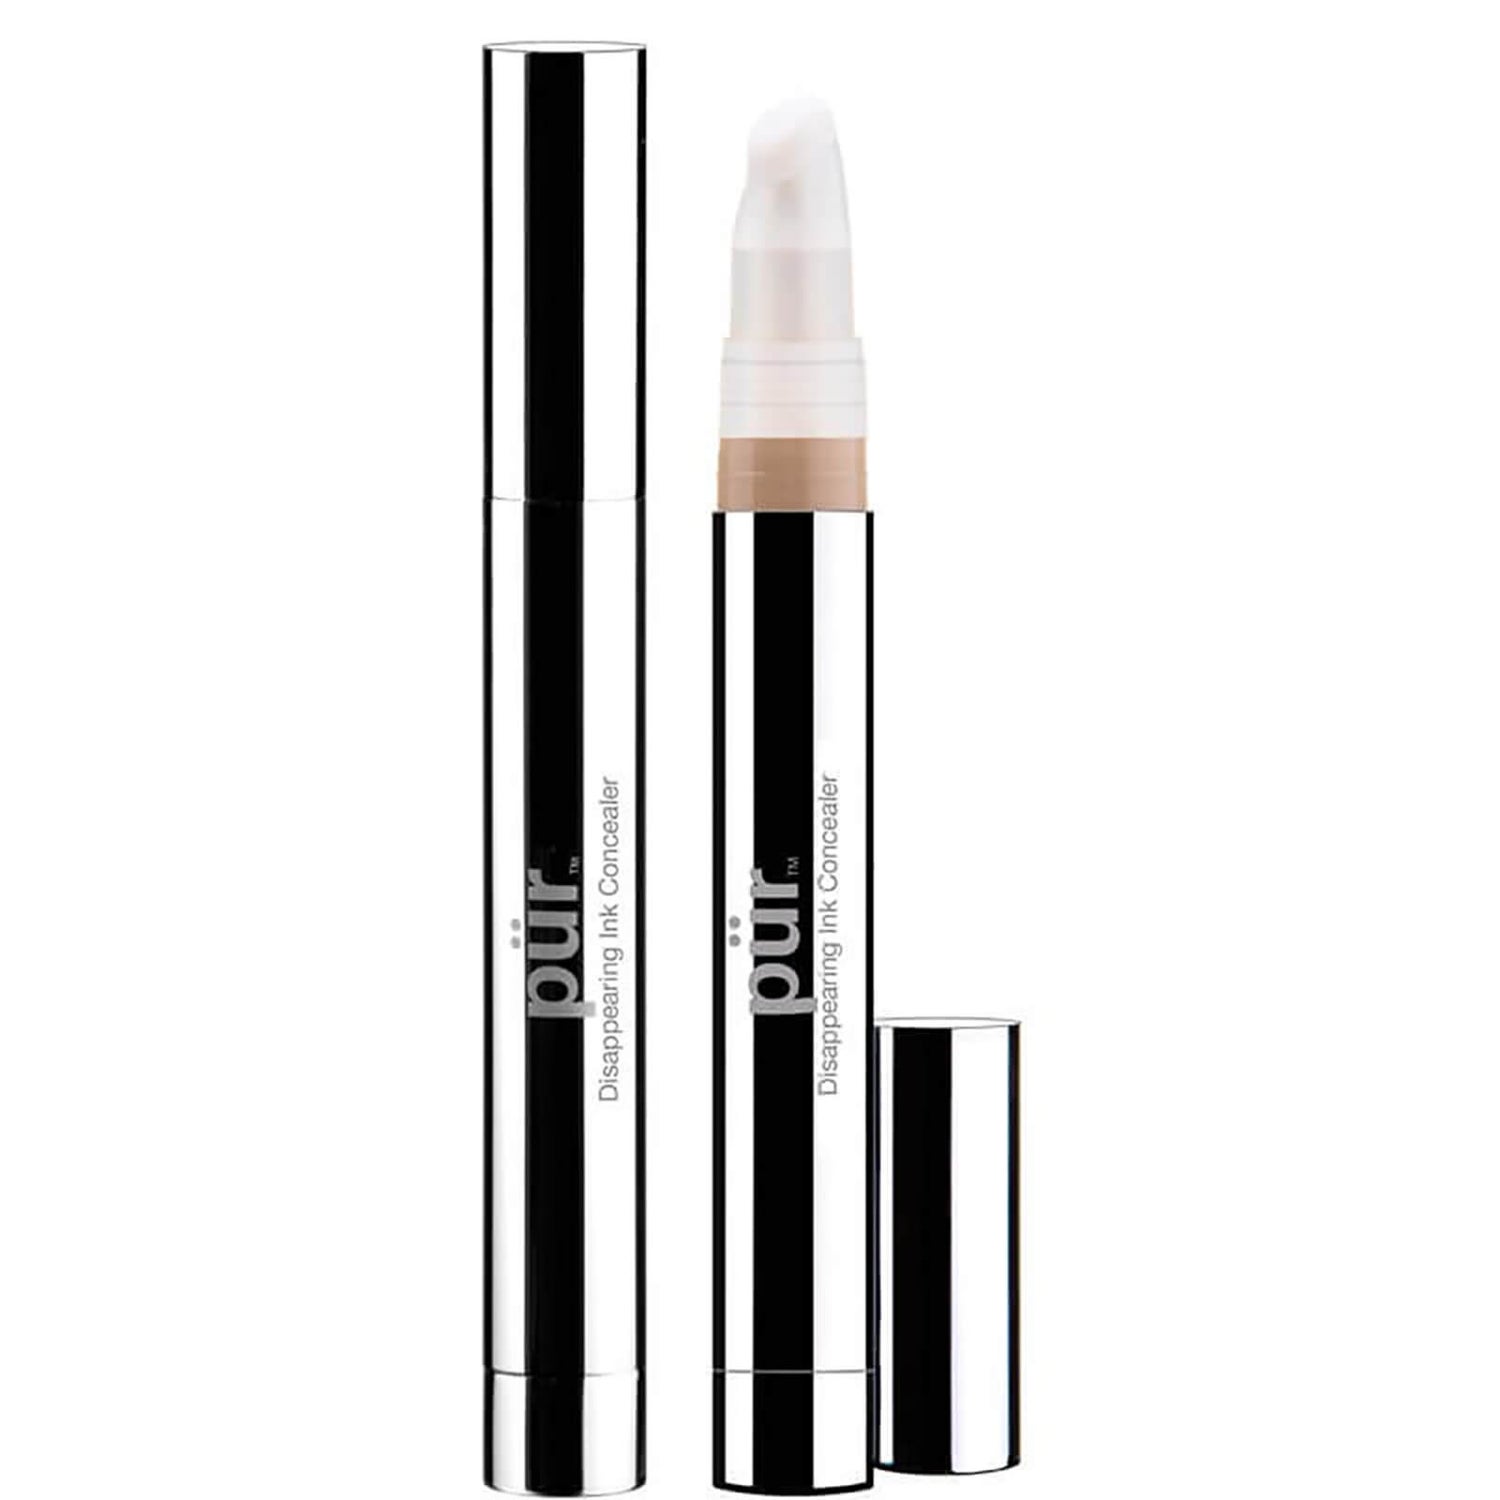 PÜR Summer Collection Disappearing Ink Concealer